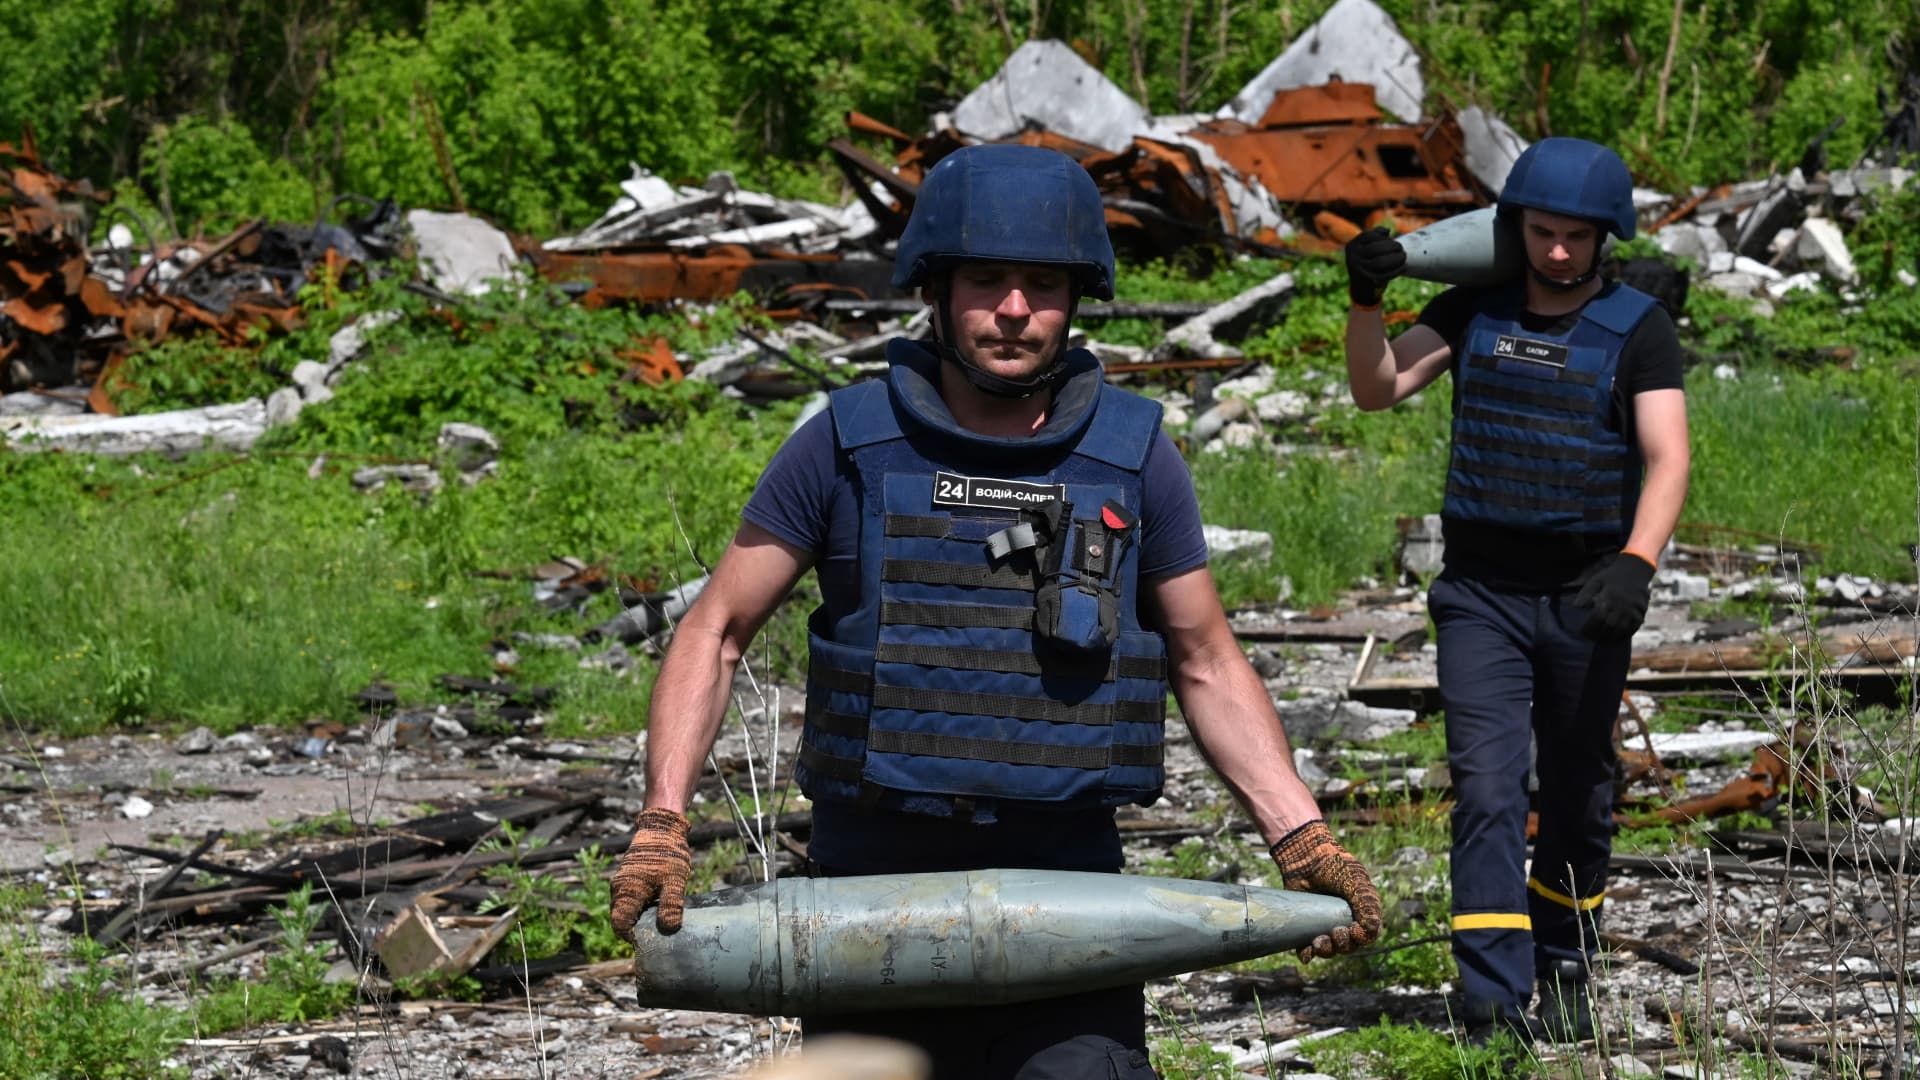 Ukrainian bomb disposal workers carry unexploded ordnance during mine clearance work in the village of Yahidne, in the liberated territories of the Chernihiv region on June 7, 2022 amid the Russian invasion of Ukraine.